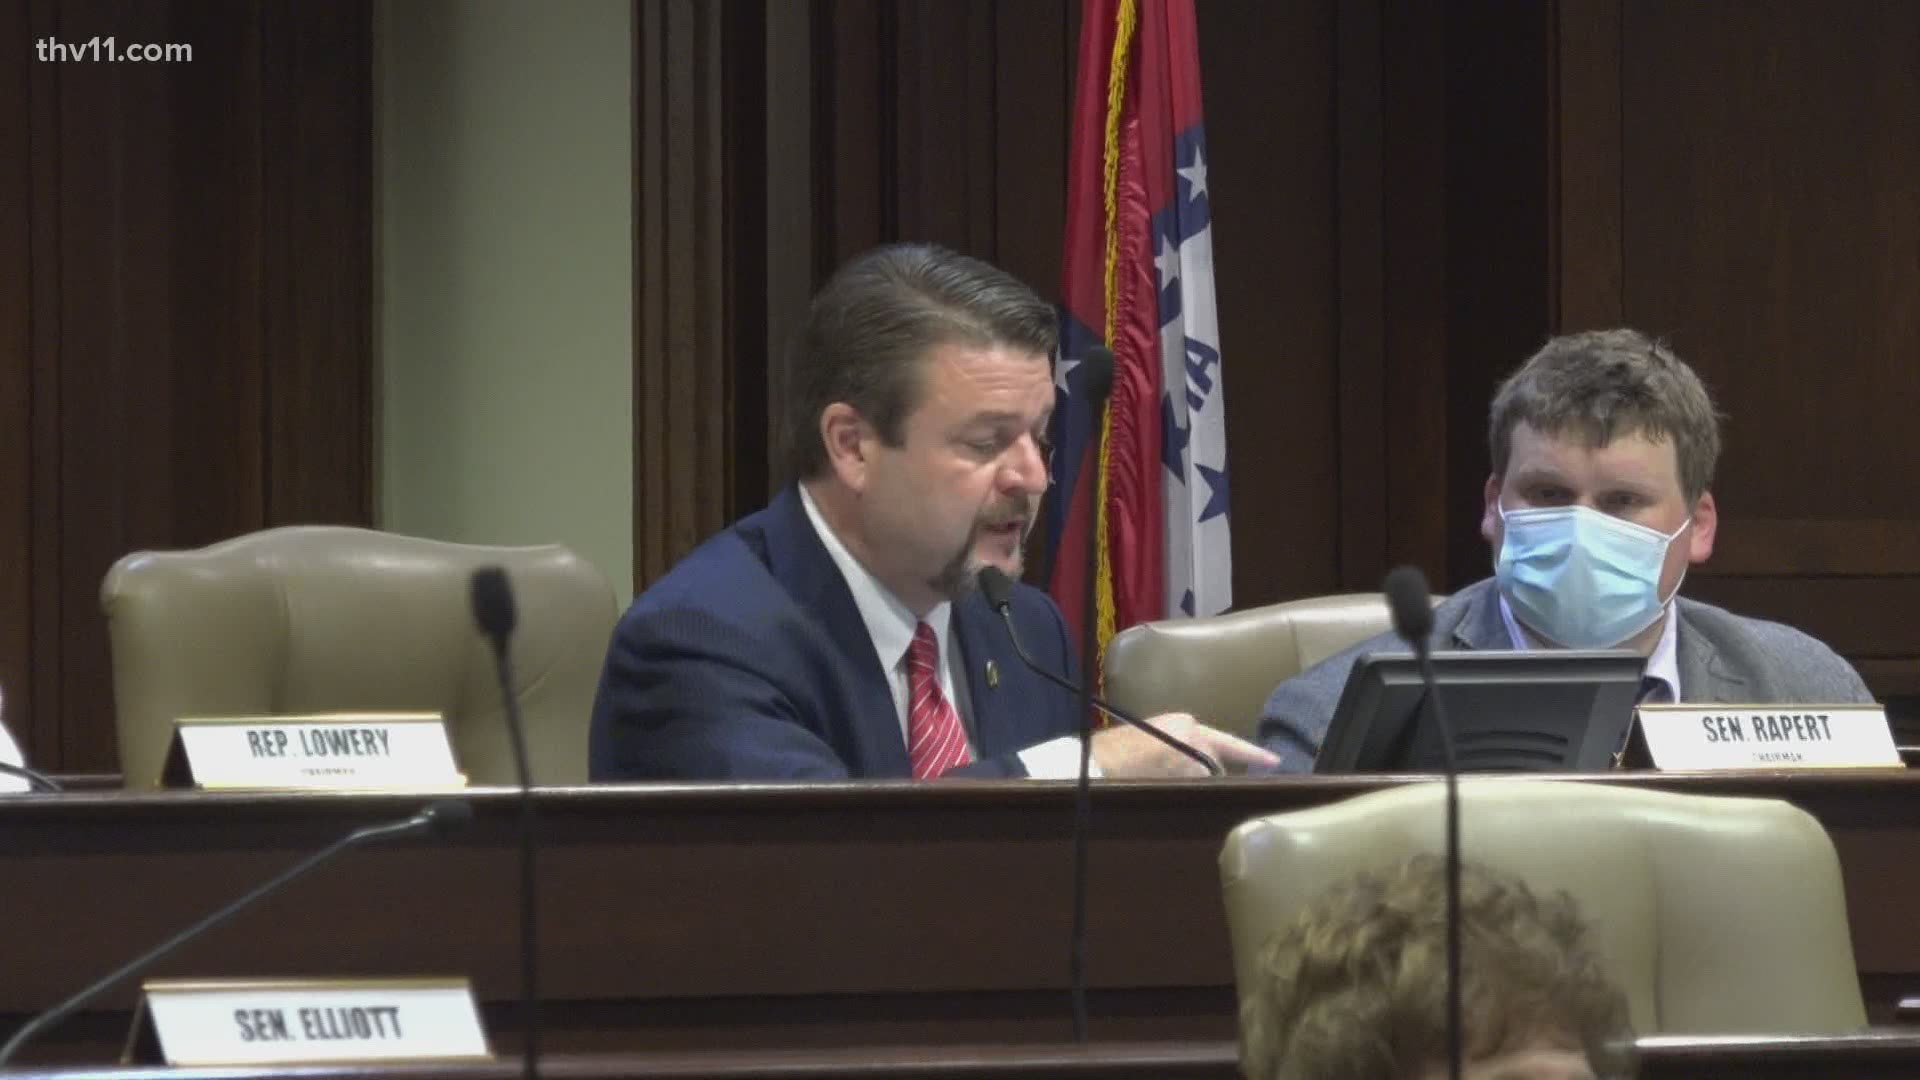 Arkansas State Senator Jason Rapert brought in doctors who support the use of hydroxychloroquine despite both the FDA and CDC saying it has "no benefit."